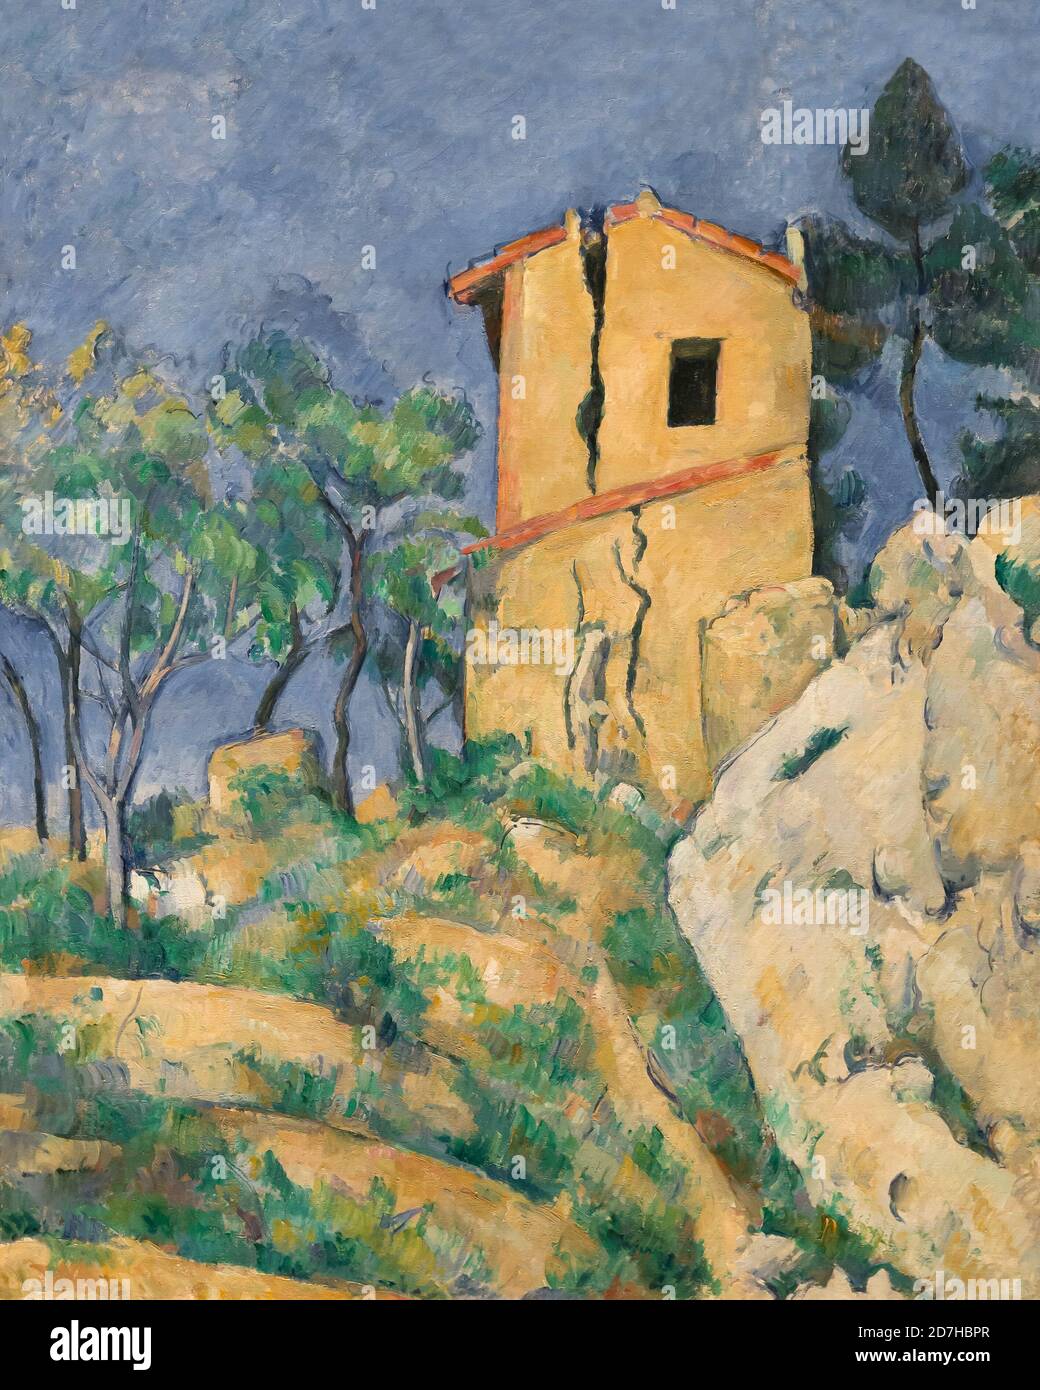 The House with the Cracked Walls, Paul Cezanne, 1892-1894, Metropolitan Museum of Art, Manhattan, New York City, USA, Nord America Foto Stock